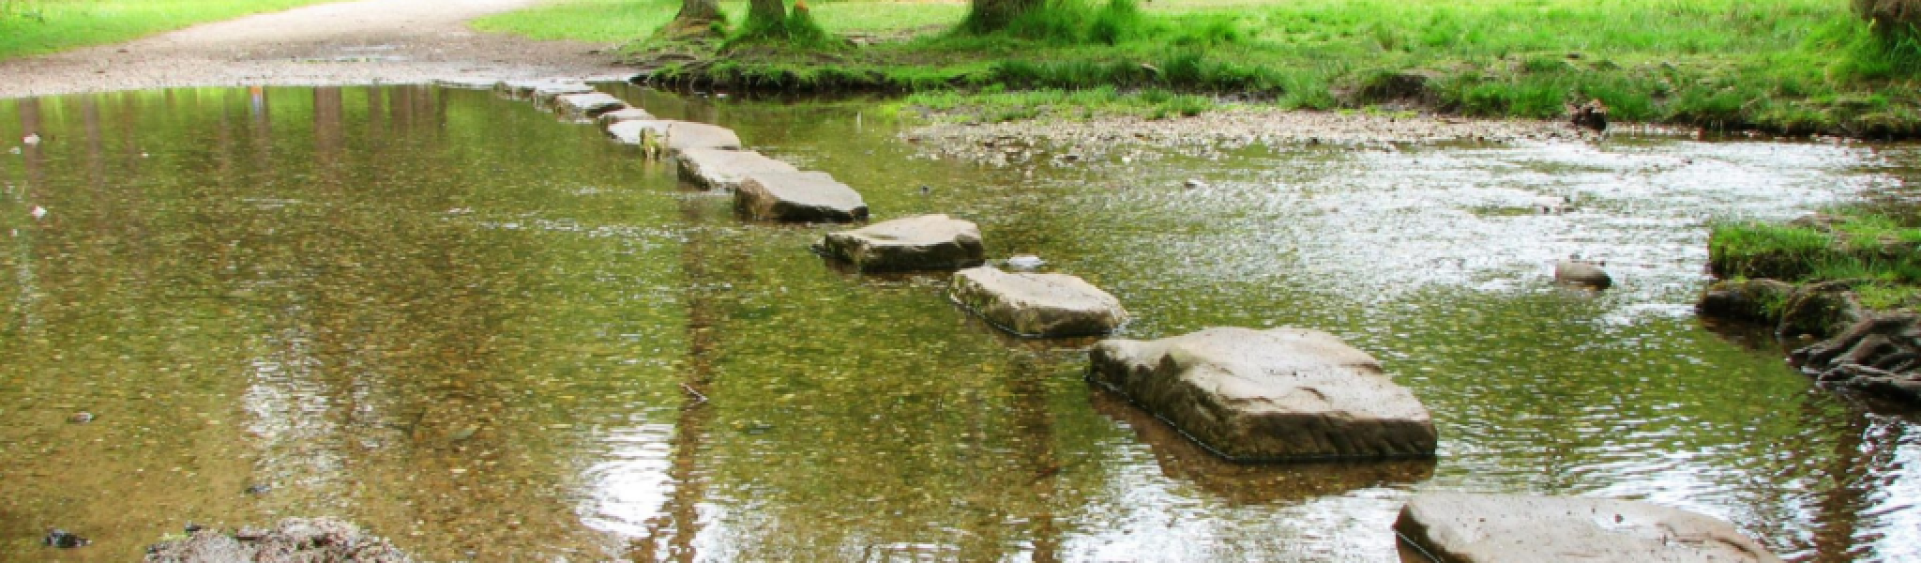 Stepping stones over stream